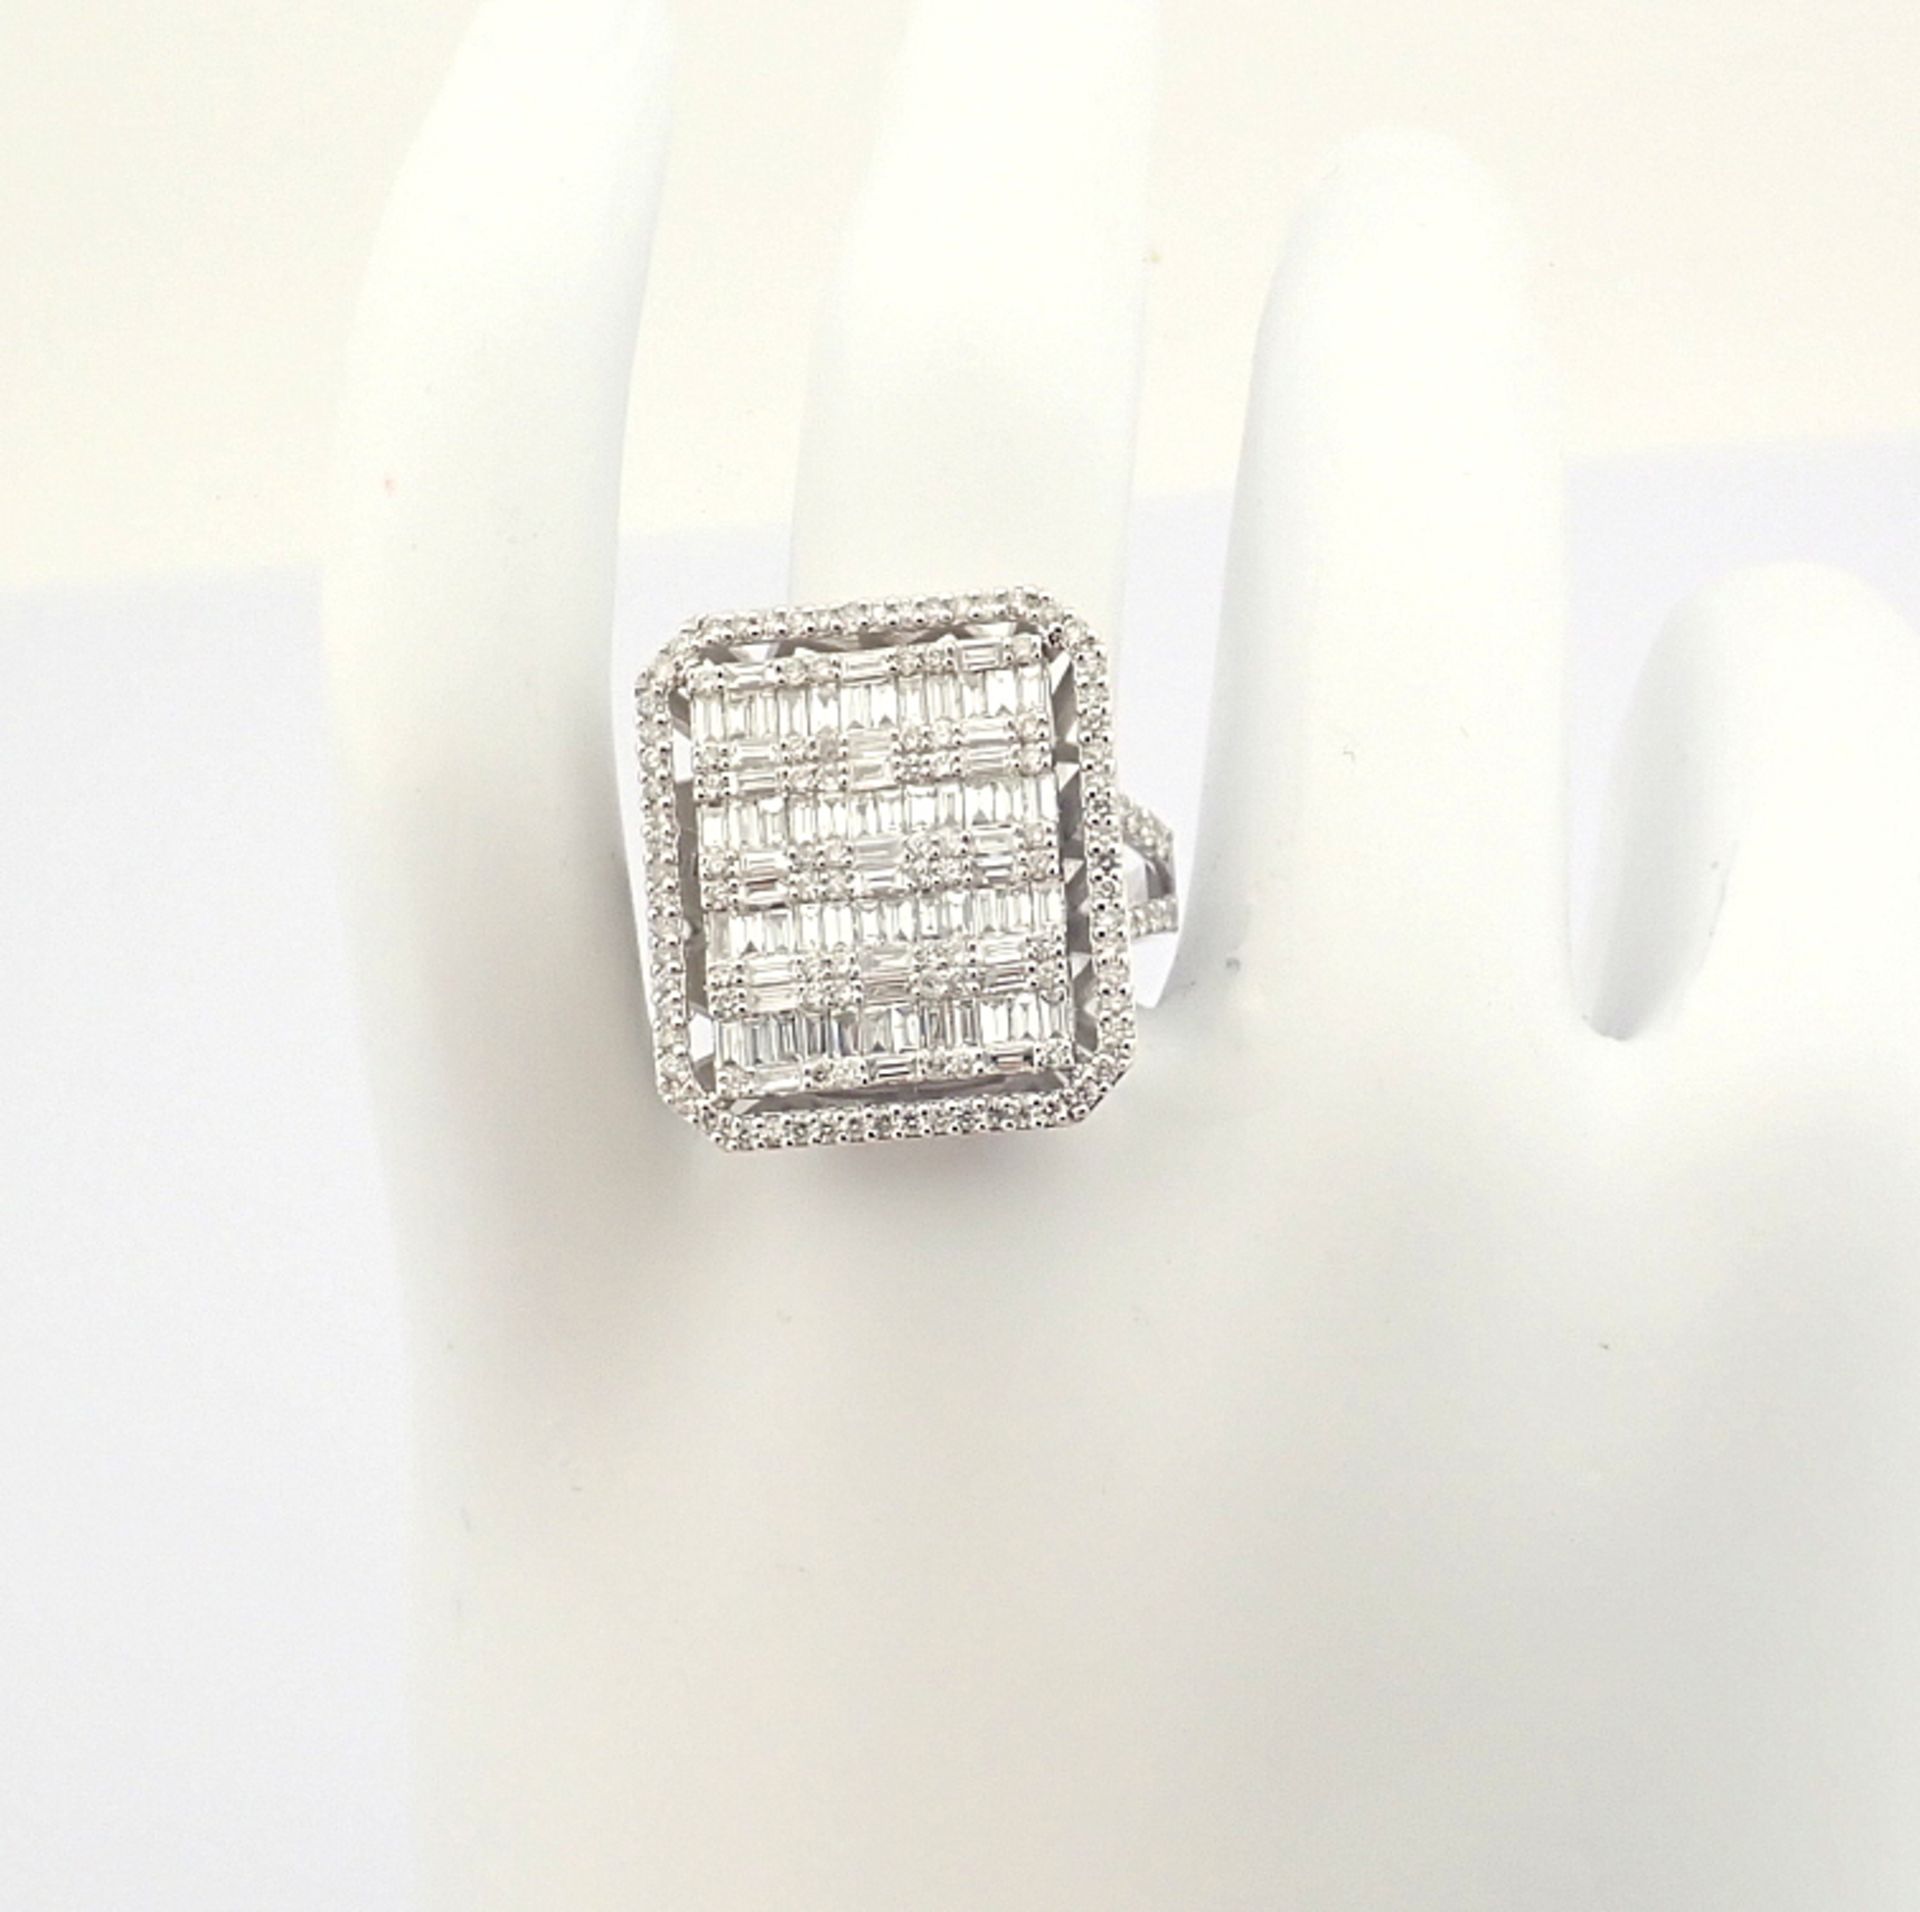 Certificated 14K White Gold Diamond Ring - Image 3 of 9